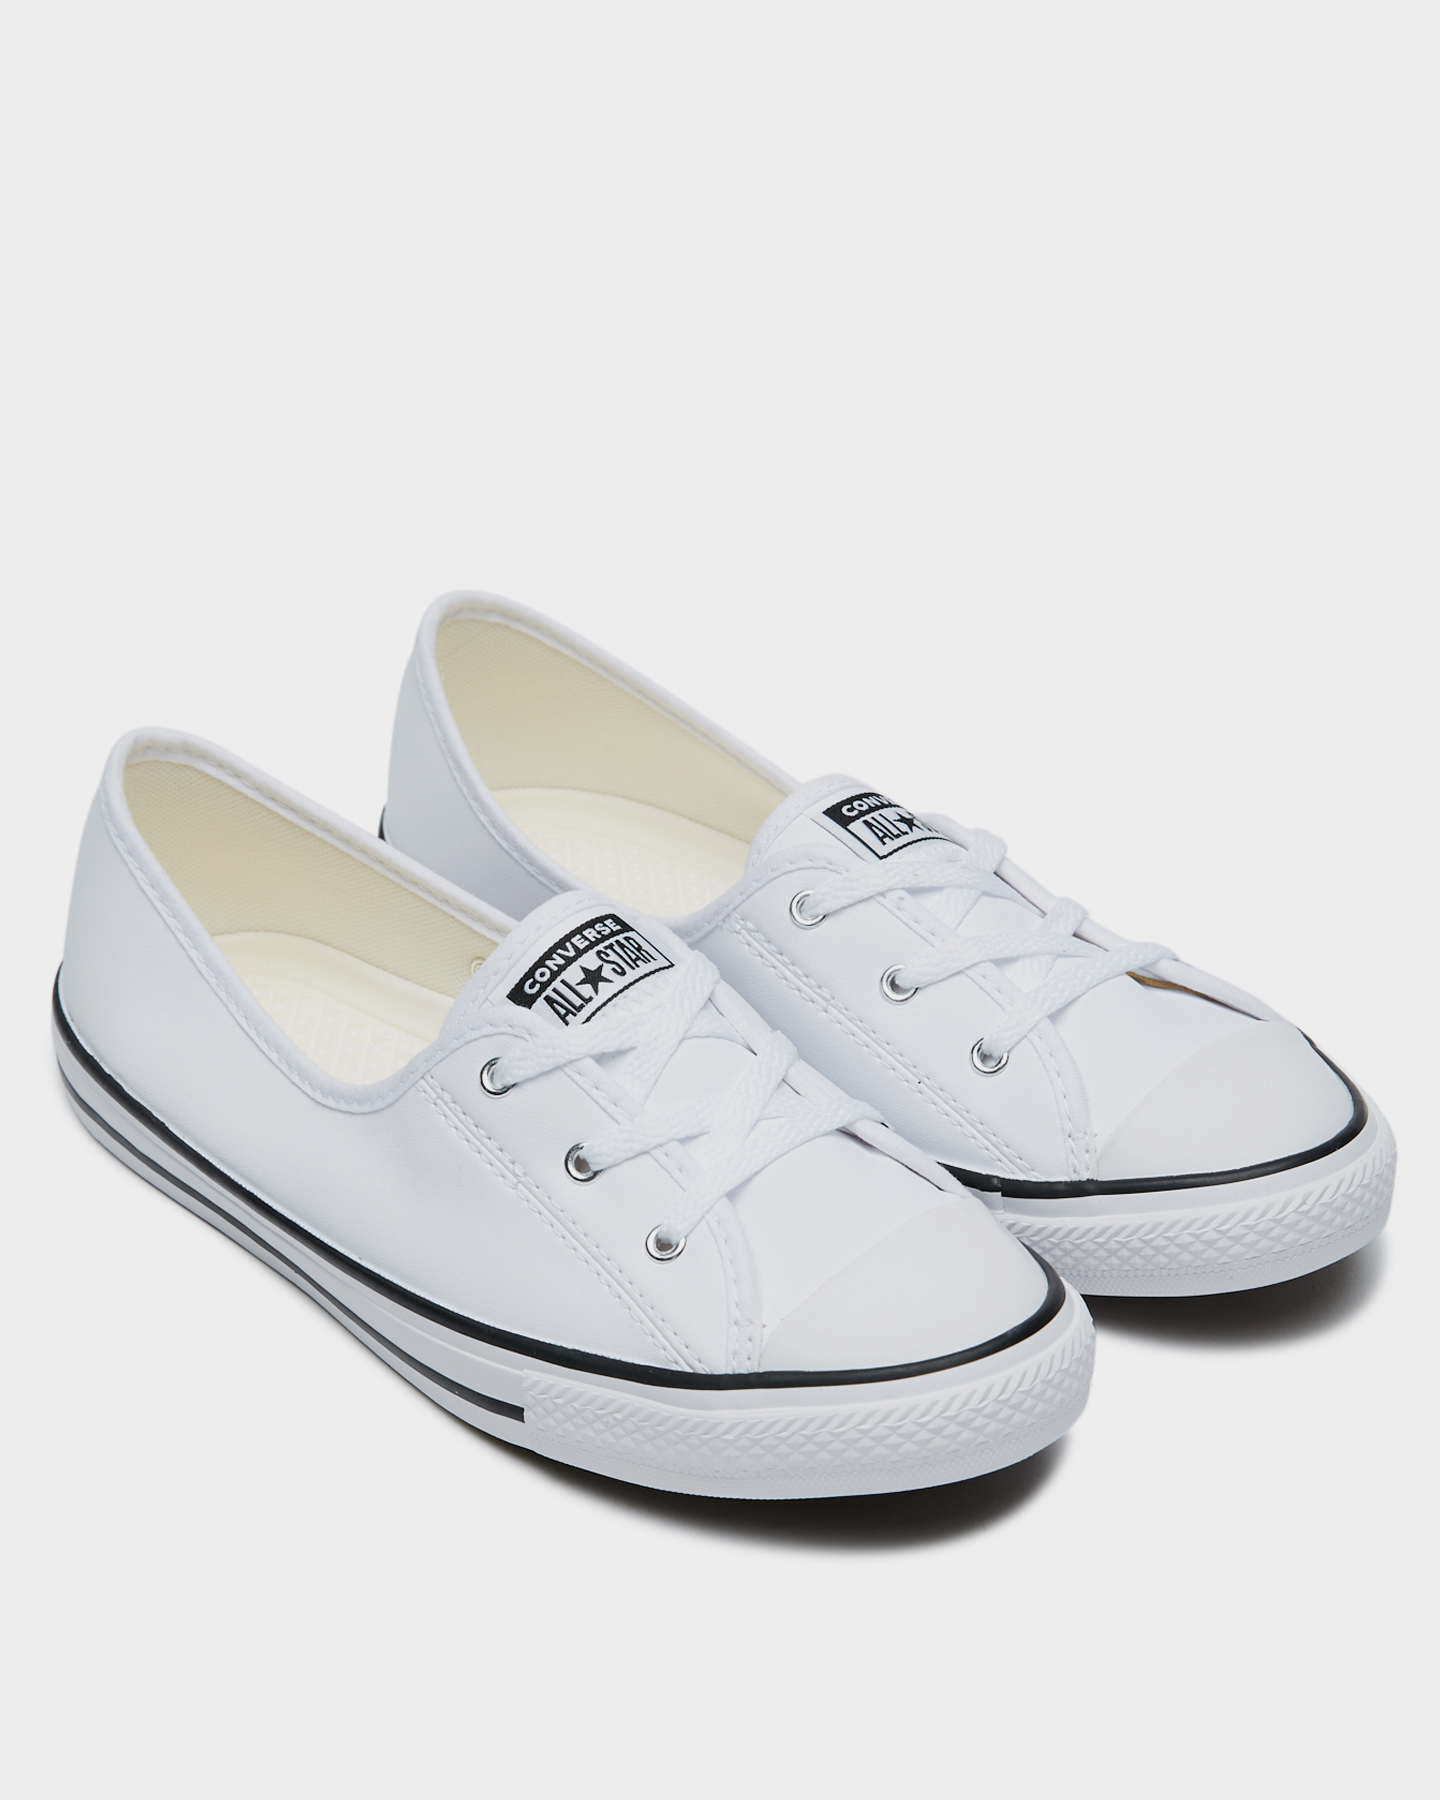 Converse Chuck Taylor All Star Ballet Lace Faux Leather Shoe - White |  SurfStitch